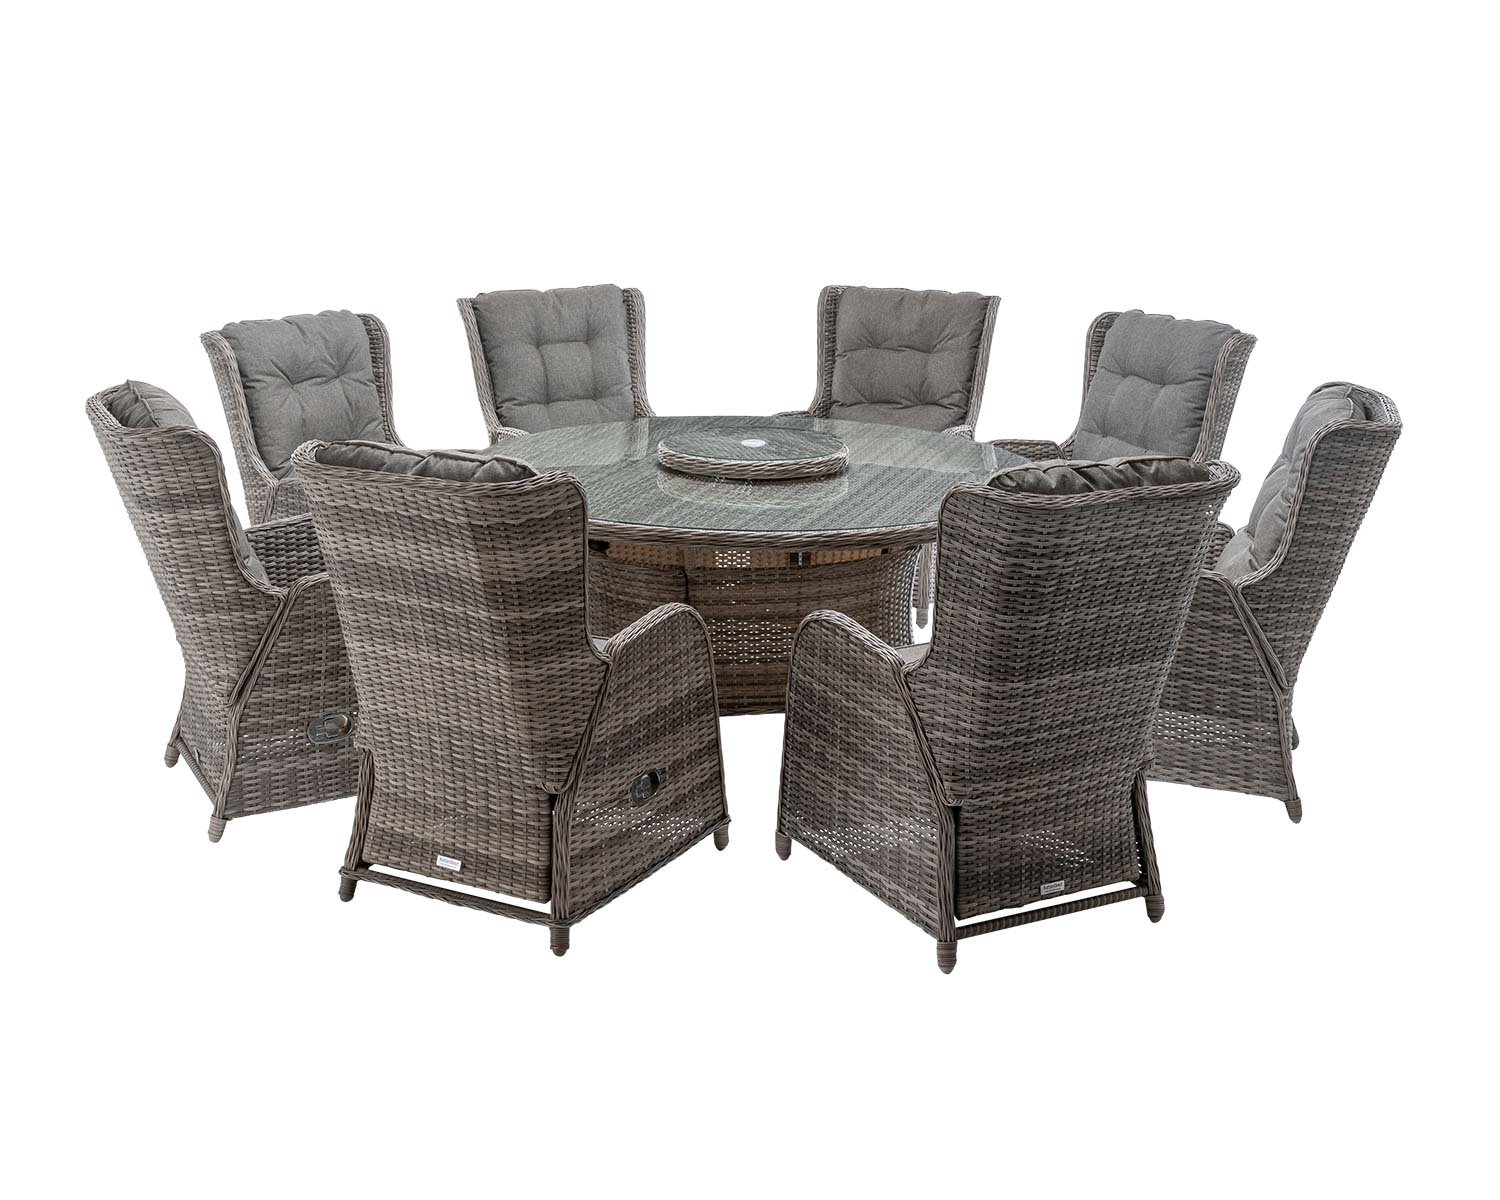 Fiji 8 Reclining Rattan Garden Dining Chairs Large Round Table With Lazy Susan In Grey